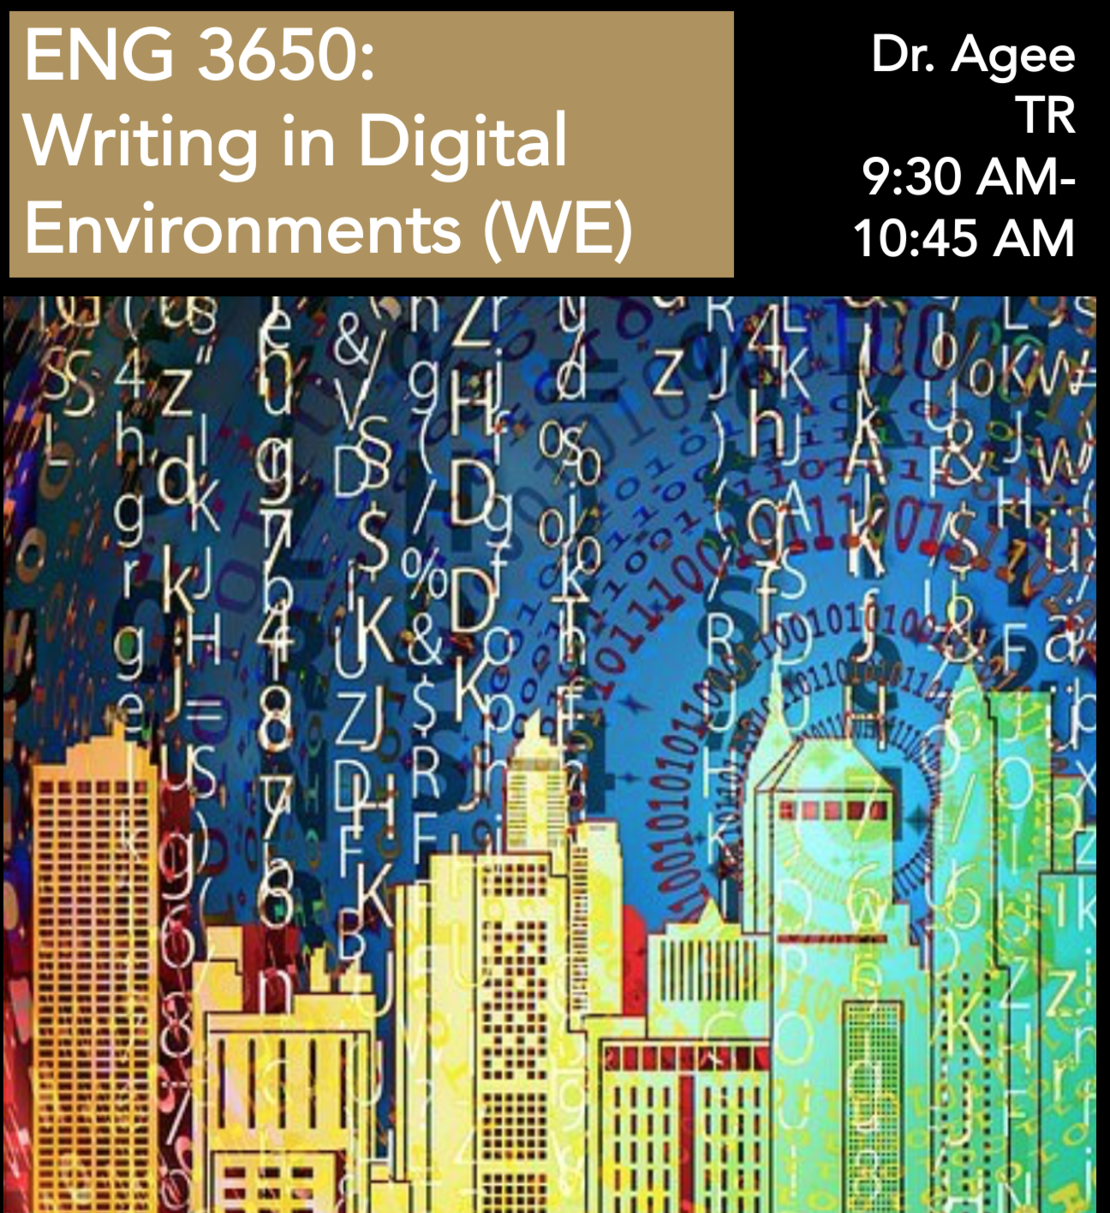 ENG 3650: Writing in Digital Environments (WE) Dr. Agee, TR 9:30-10:45 AM